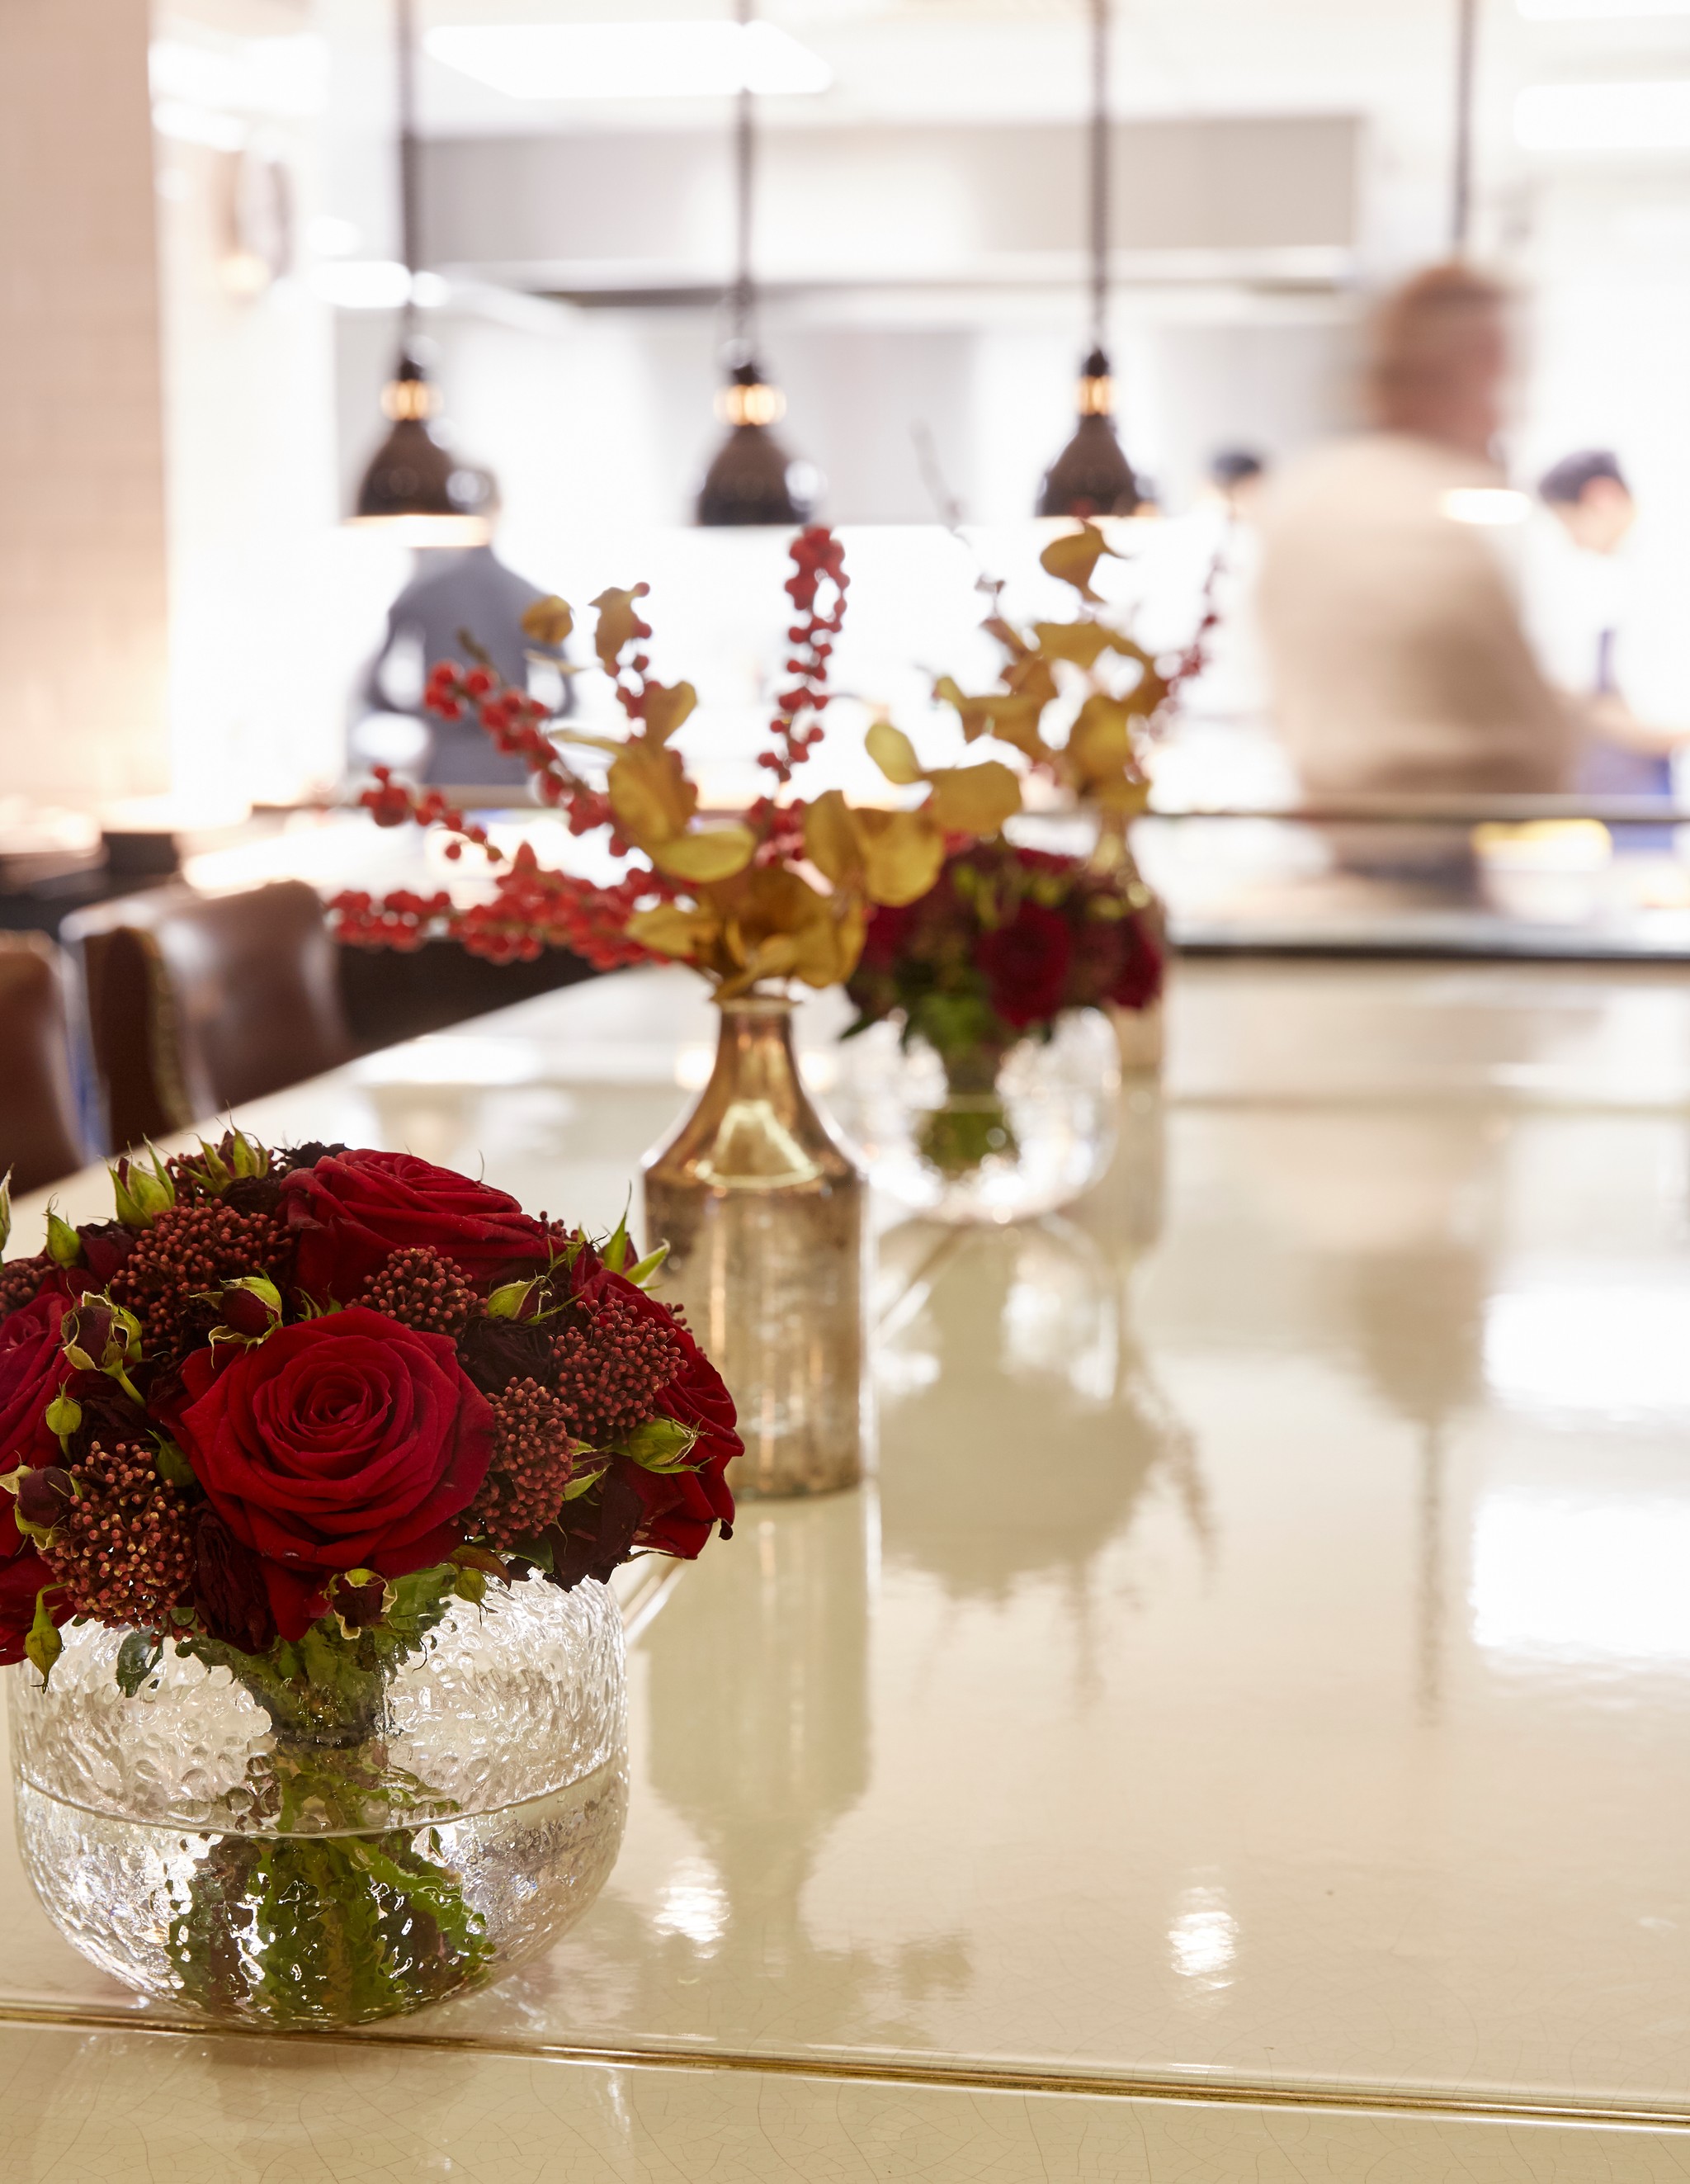 Red flowers on the chef's table at Marcus Belgravia